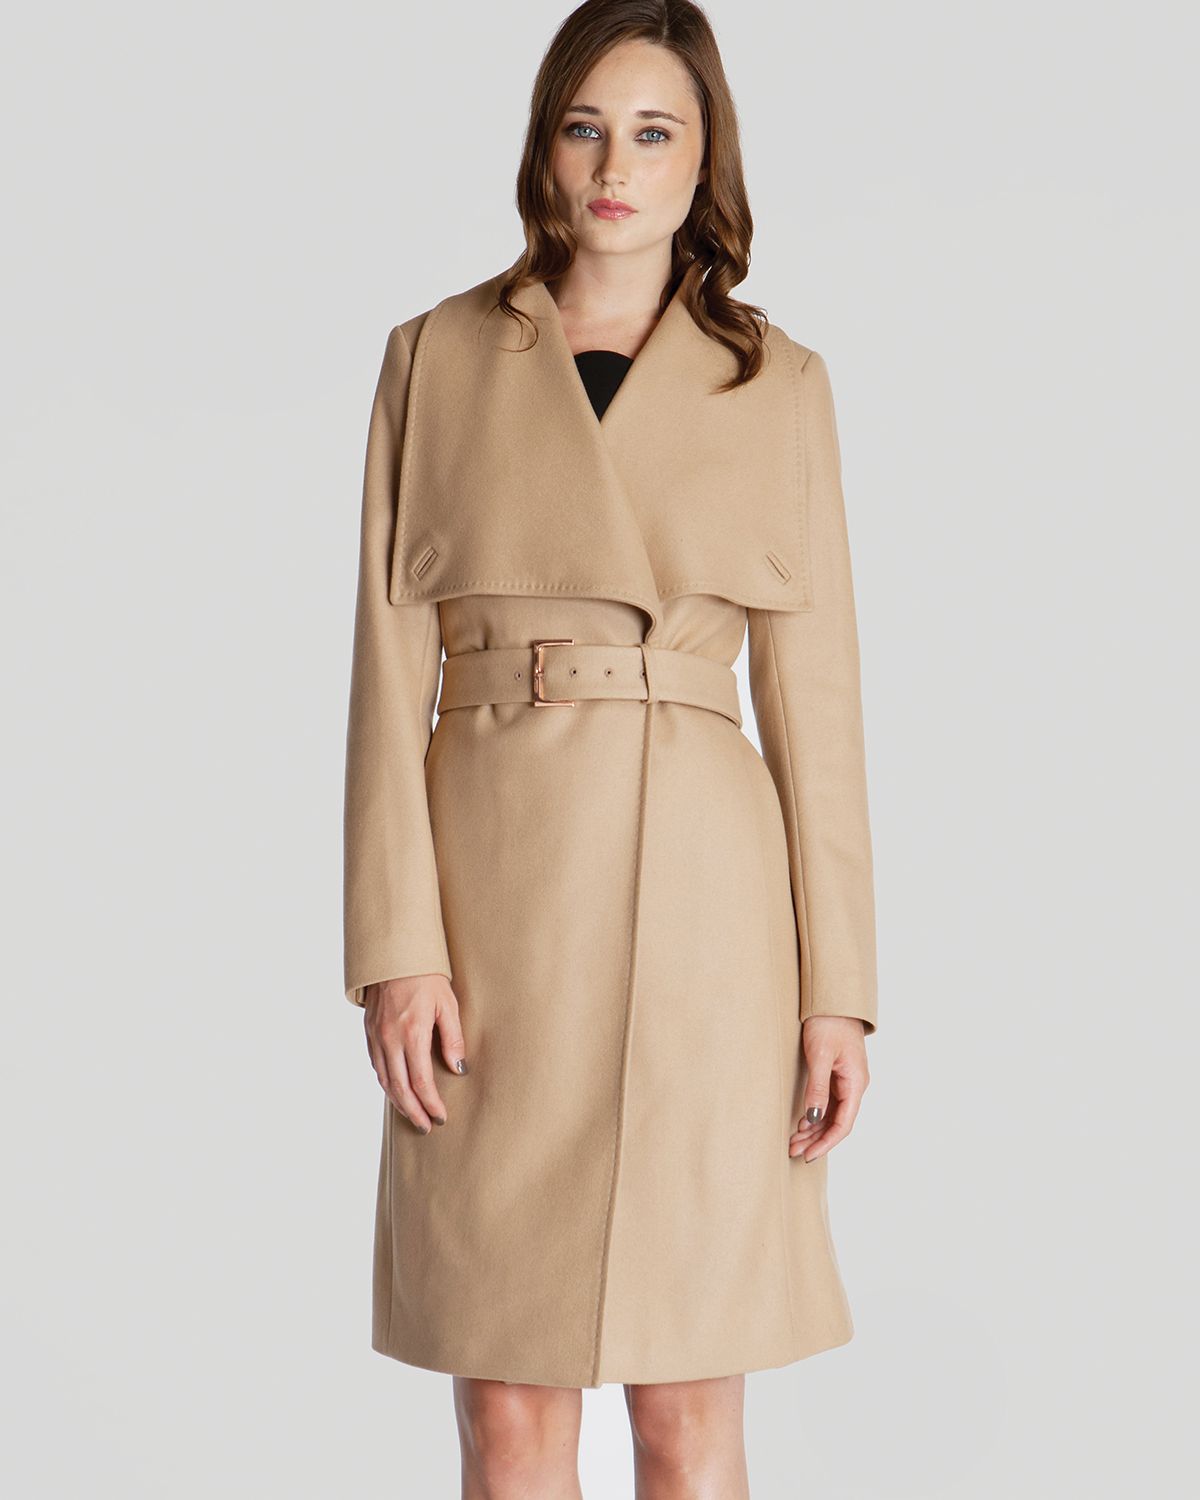 Lyst - Ted Baker Coat Madigan Draped Front in Natural